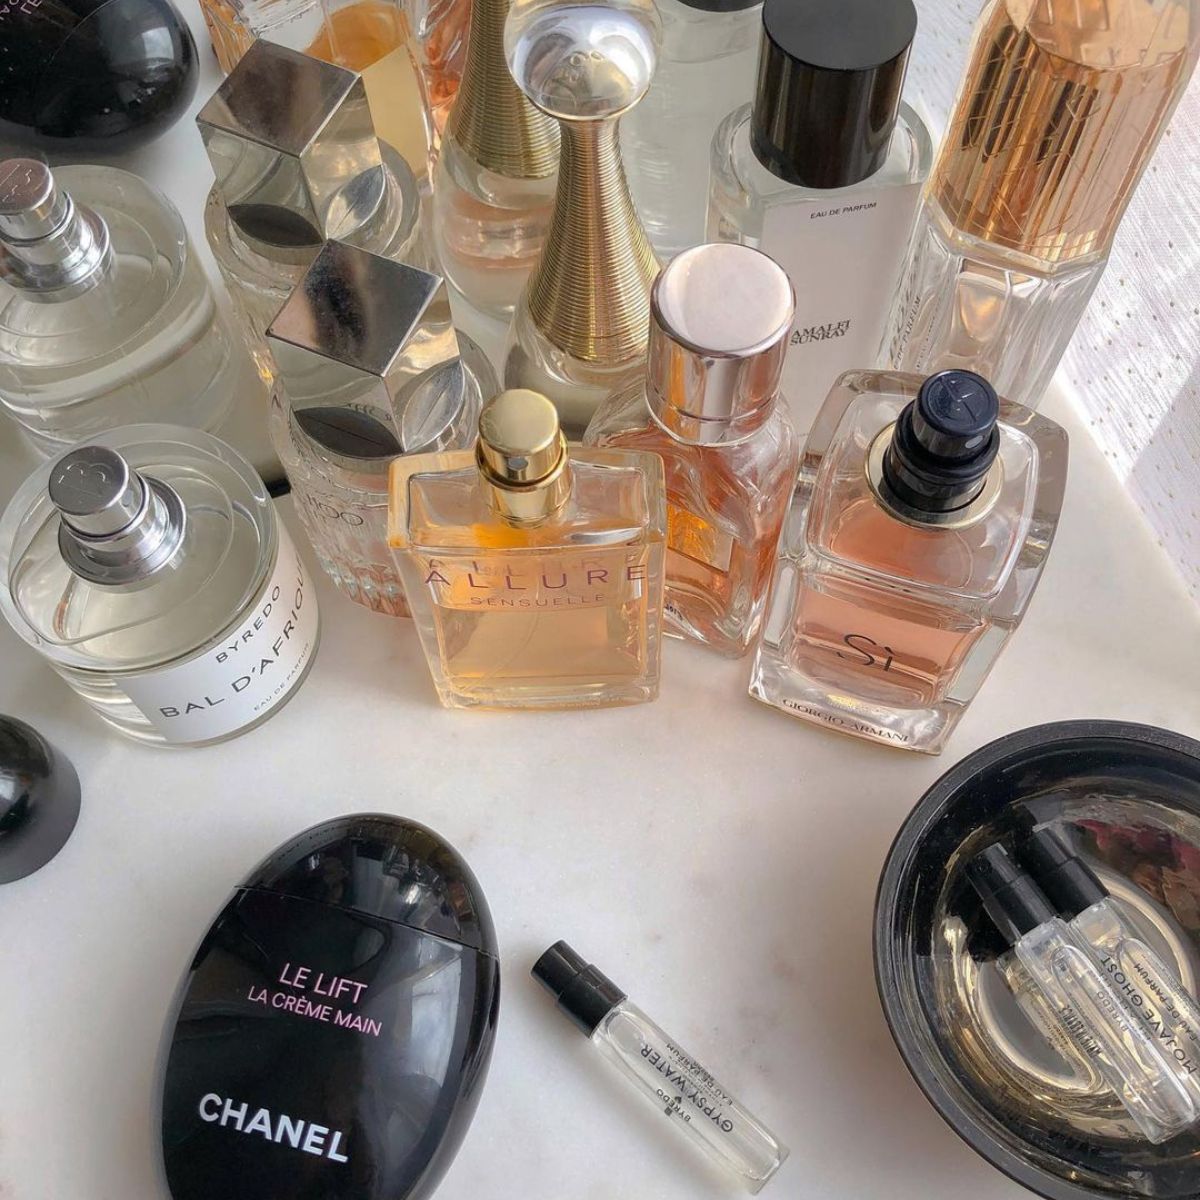 16 Best Zara Perfumes That Smell Expensive & Glam